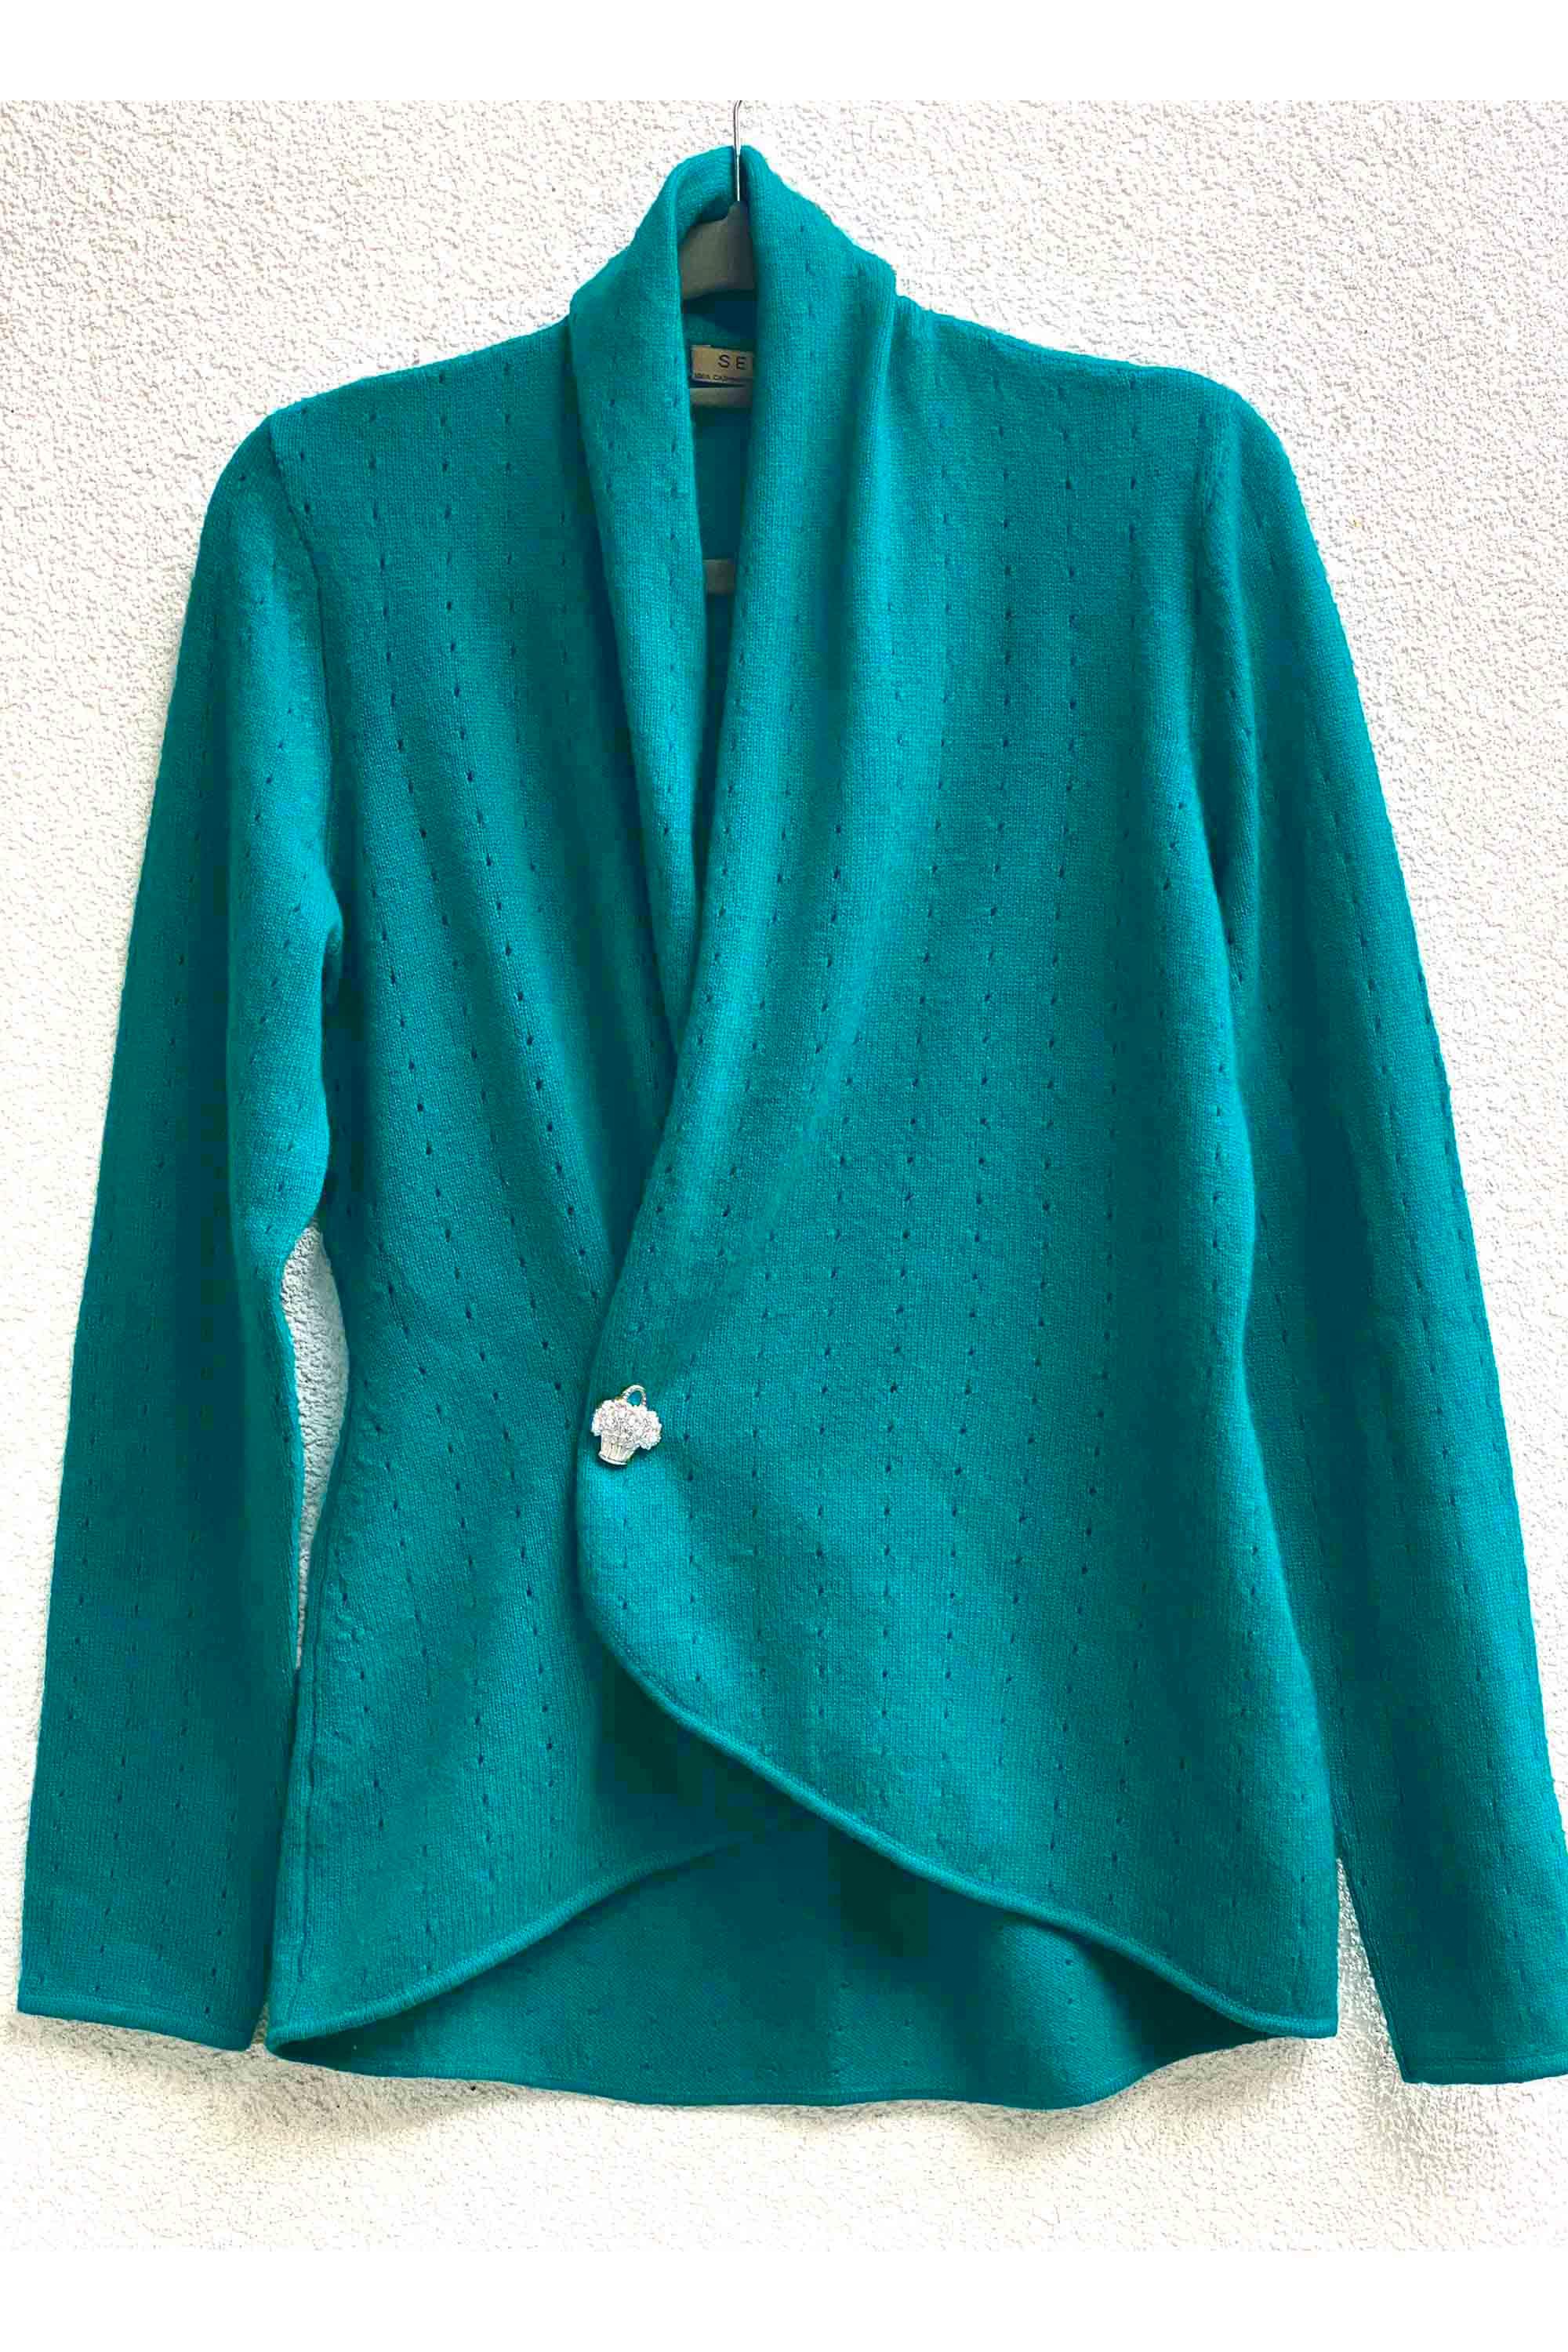 Dark turquoise women’s luxury Cashmere cardigan jacket, blue green ladies light weight summer cardigan, open front tailored jacket, fitted shawl neck collared elegant cardigan sale, open V-neck sweater knit London UK | SEMON Cashmere